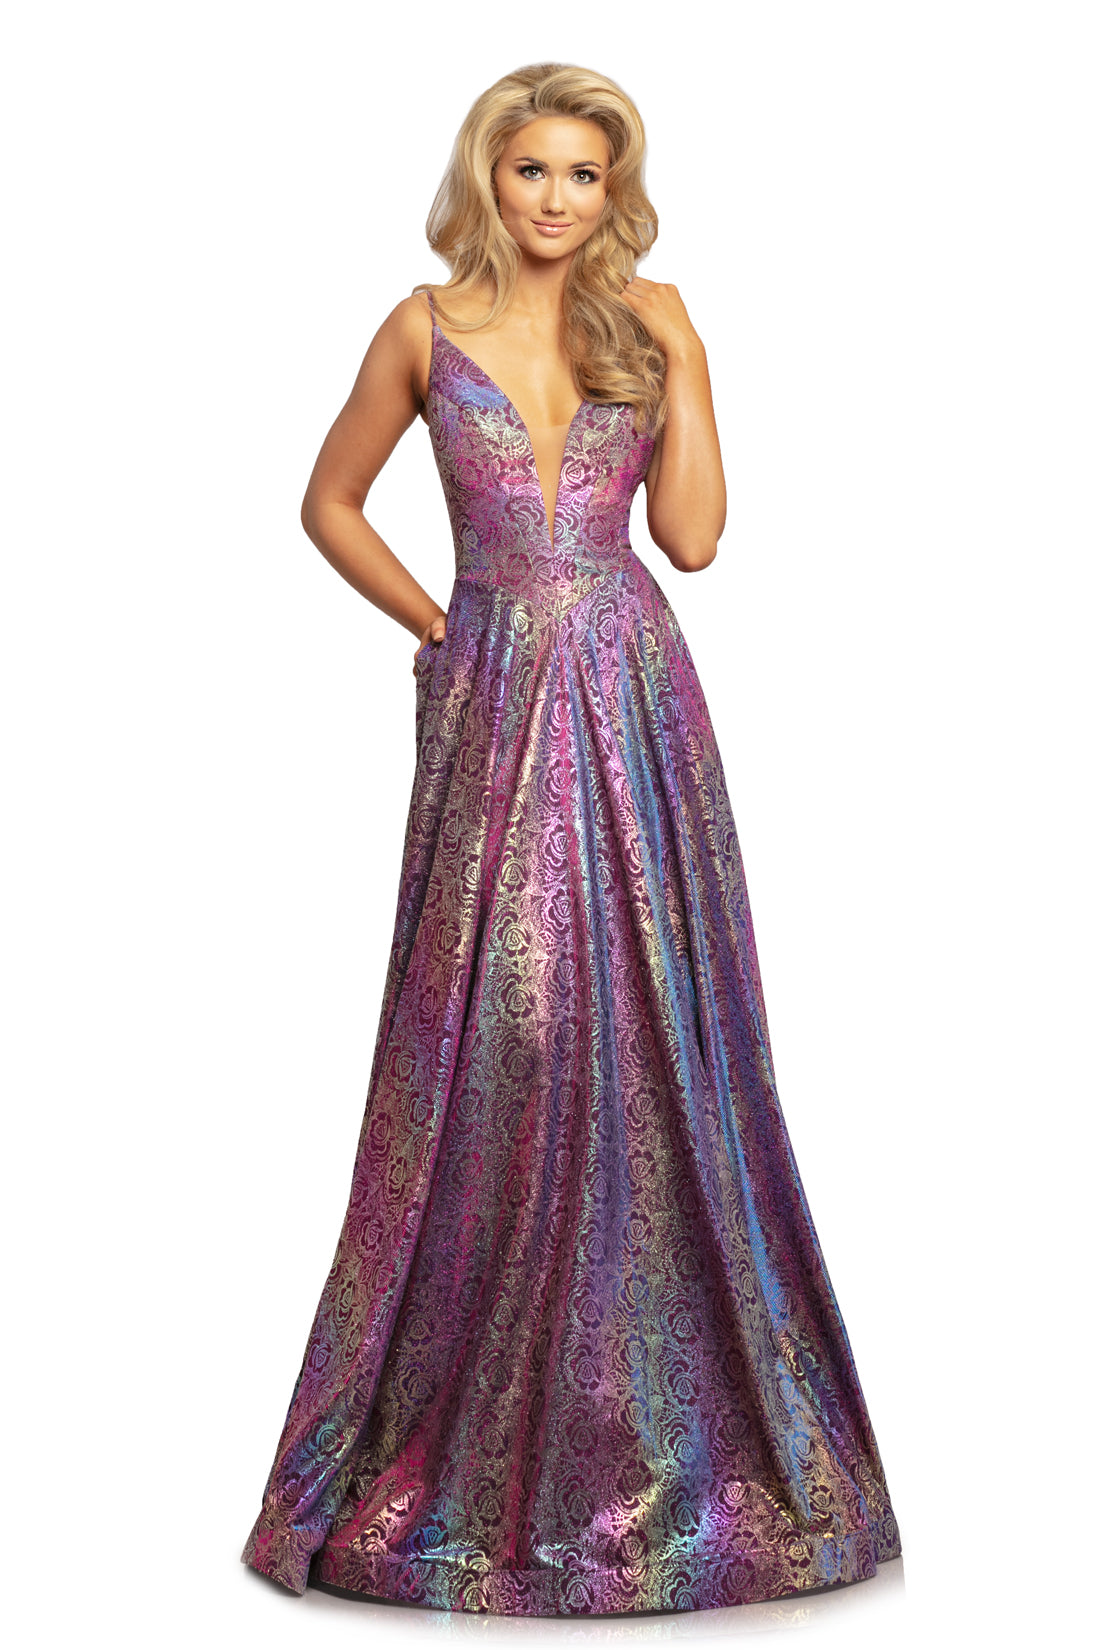 Johnathan Kayne 2094 is an iridescent Royal Blue Prom Dress, Pageant Gown & Formal Evening Wear. This long Gown Features a Metallic Glitter Floral Rose Design with a plunging neckline and spaghetti straps. This fitted bodice flows into a beautiful color changing A line skirt.